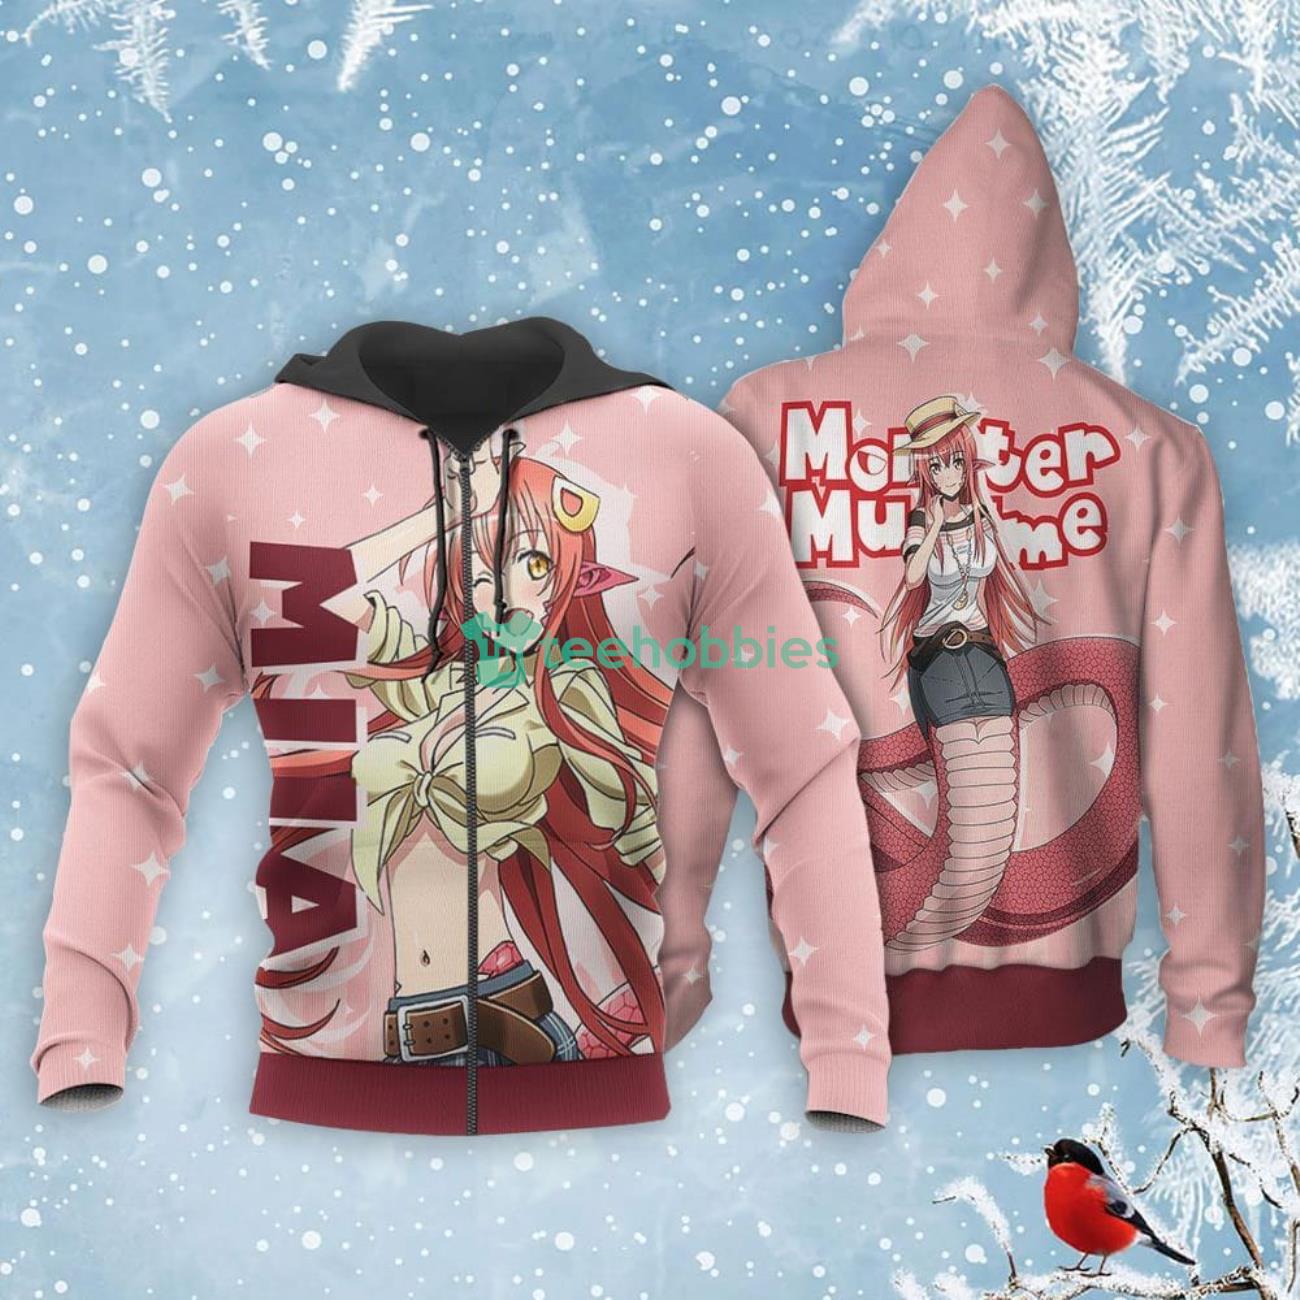 Monster Musume Miia All Over Printed 3D Shirt Custom Anime Fans Product Photo 1 Product photo 1